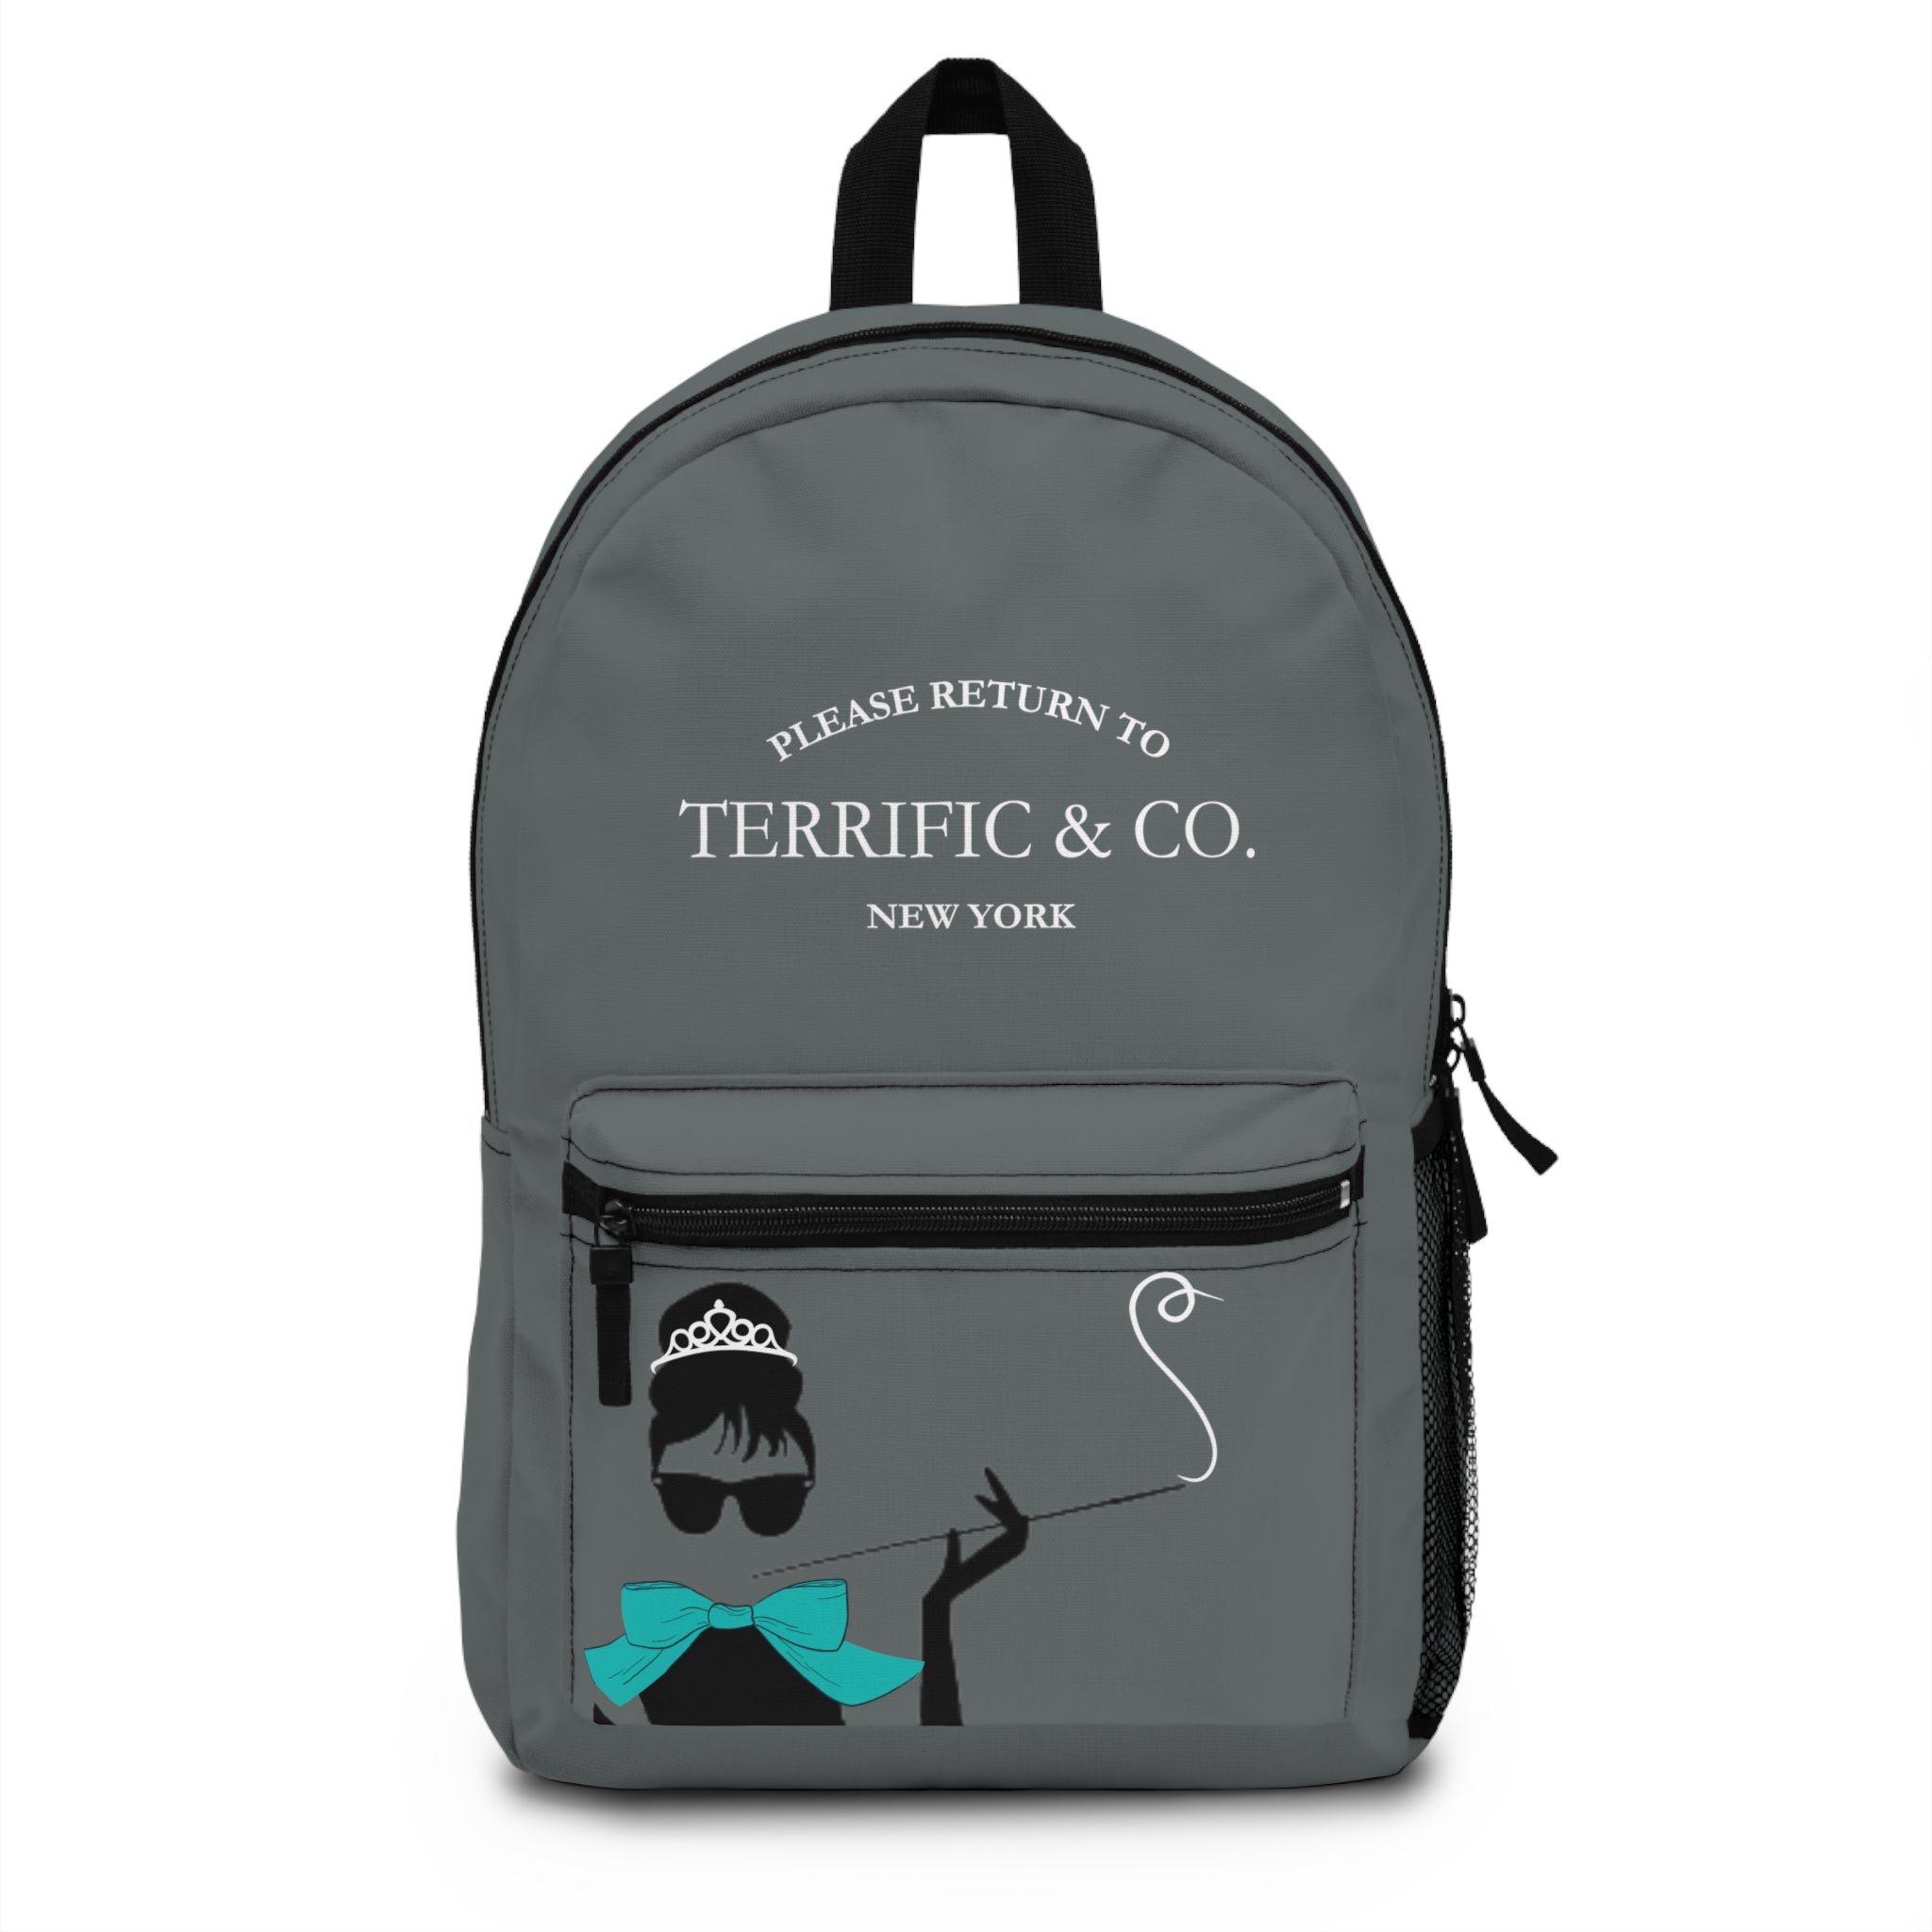 Terrific and Co. (Silhouette + Bow) Grey Backpack, Unisex Backpack Bags One-size The Middle Aged Groove